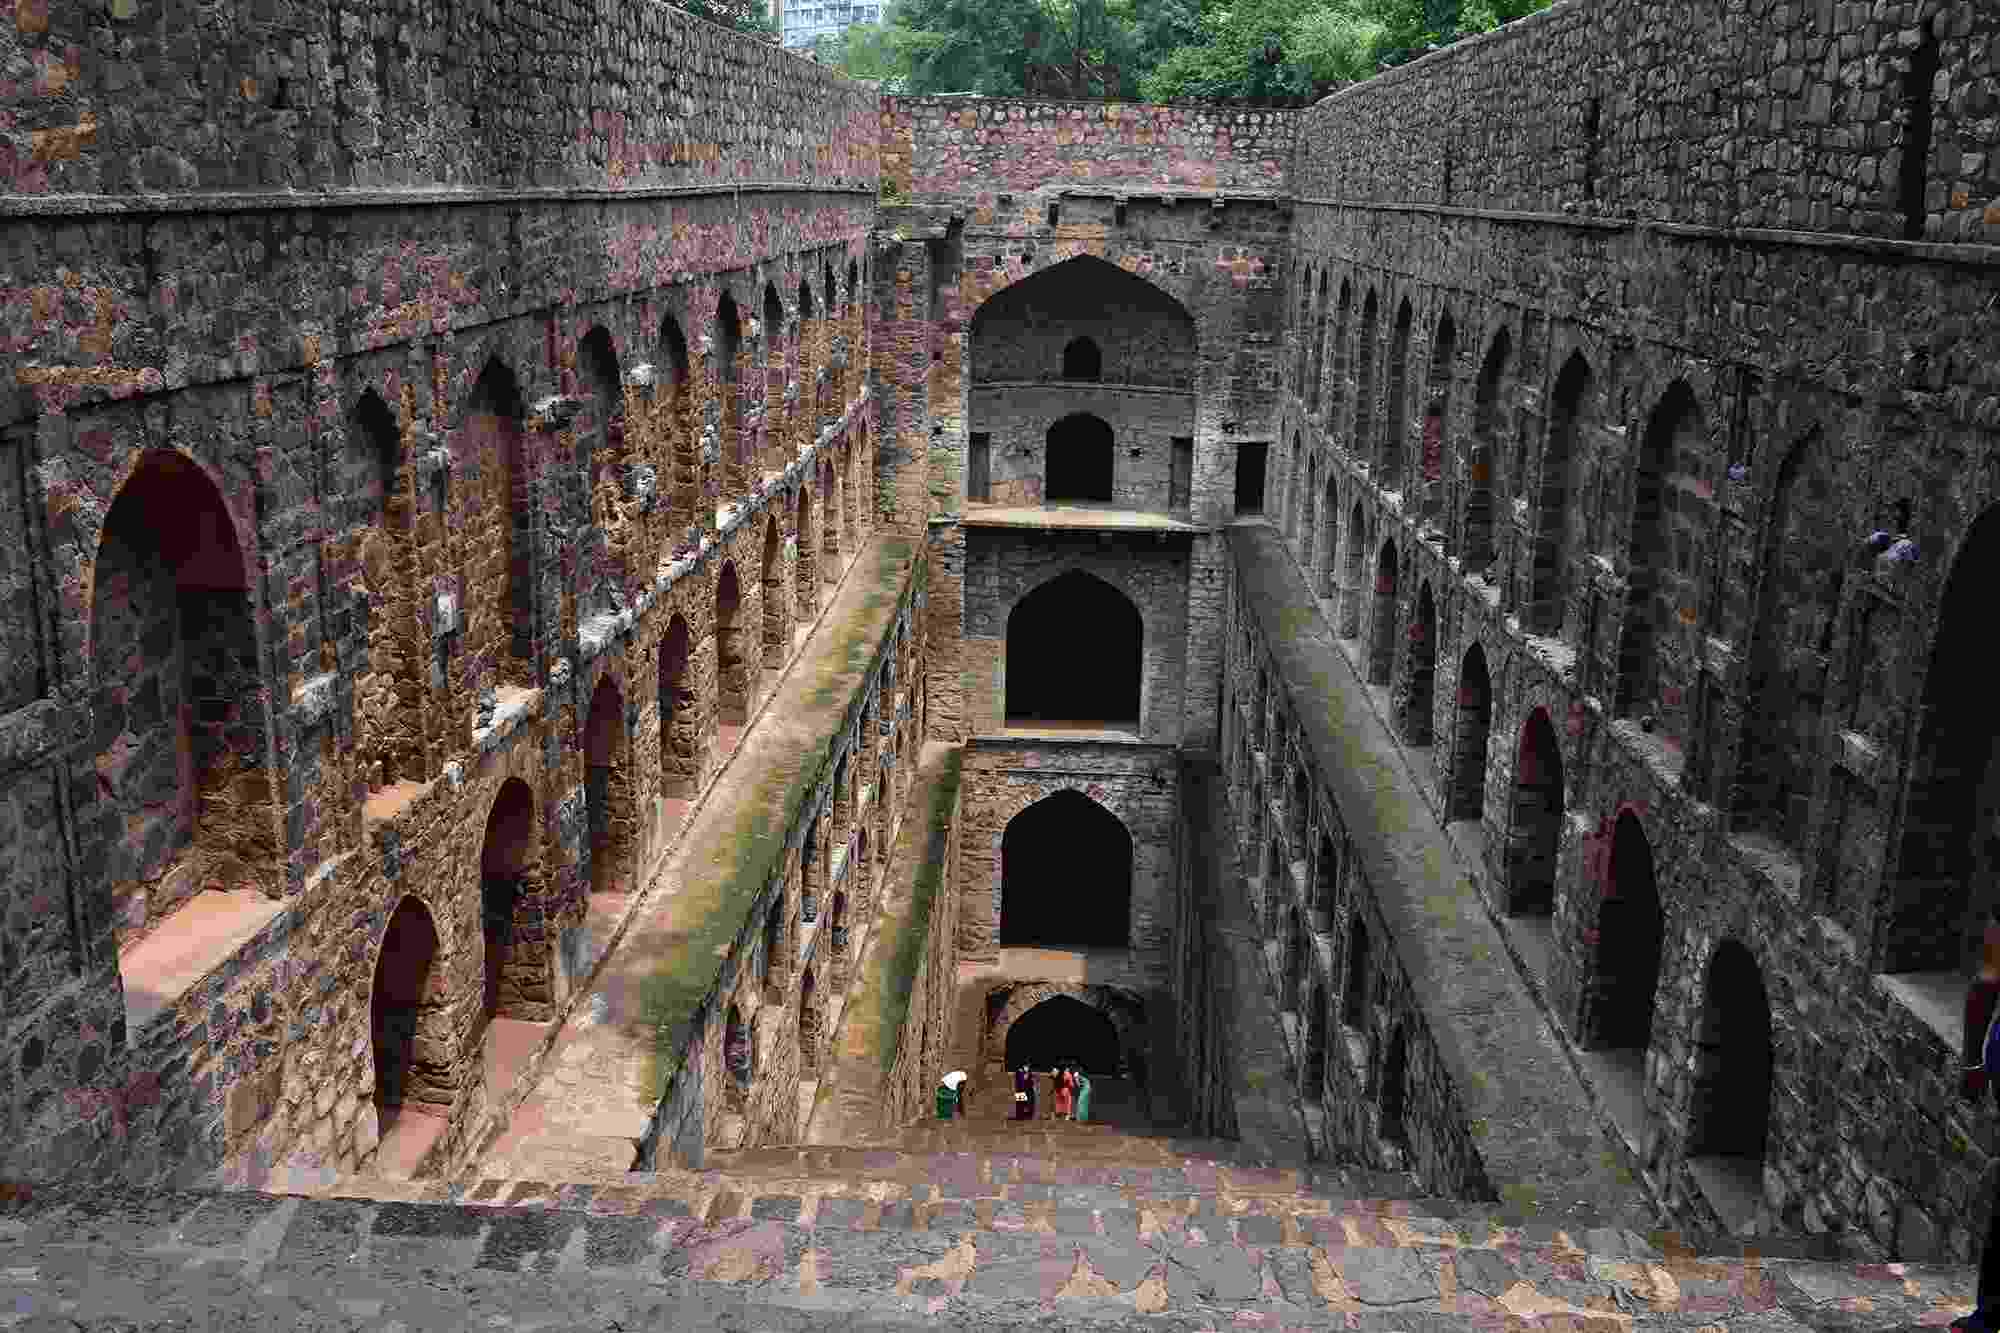 A view down into a historical brown brick stepwell in Delhi. Three levels of the distinctive steps and archways are visible.